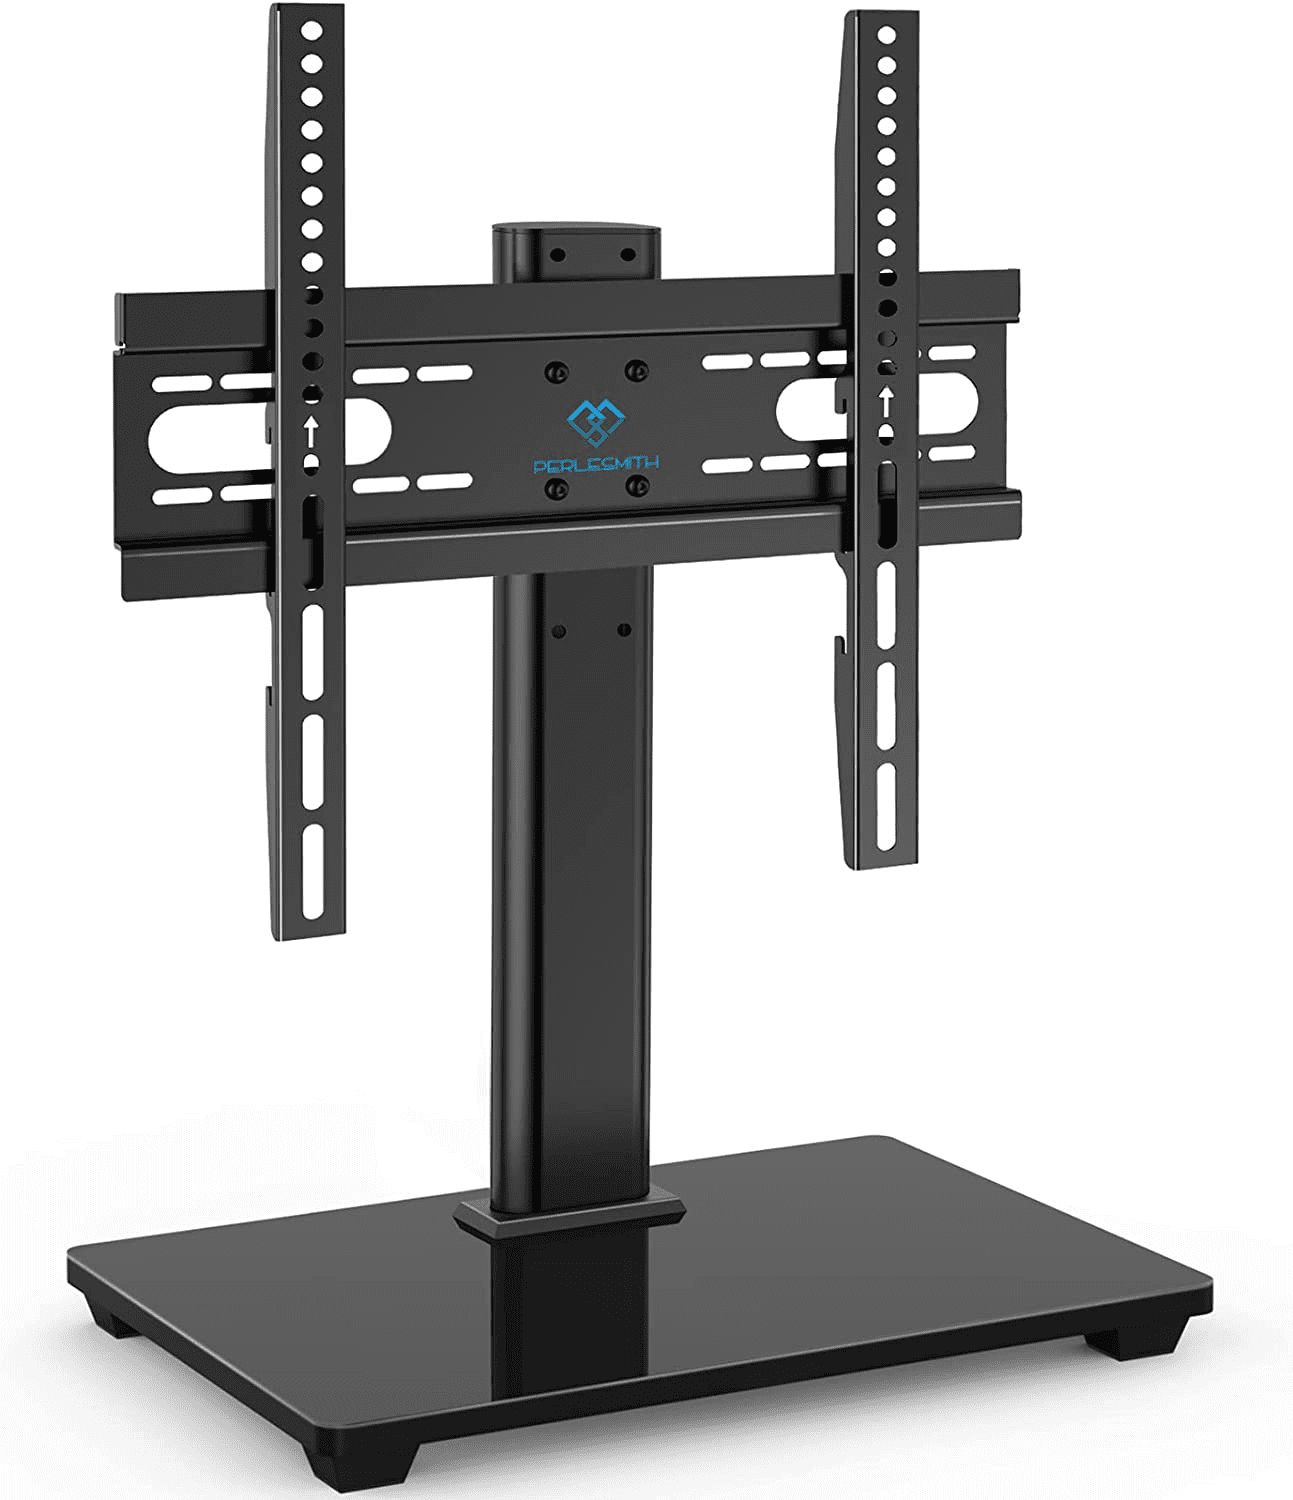 Universal Tabletop Tv Stand Base With Mount,For India | Ubuy For Universal Tabletop Tv Stands (View 6 of 15)